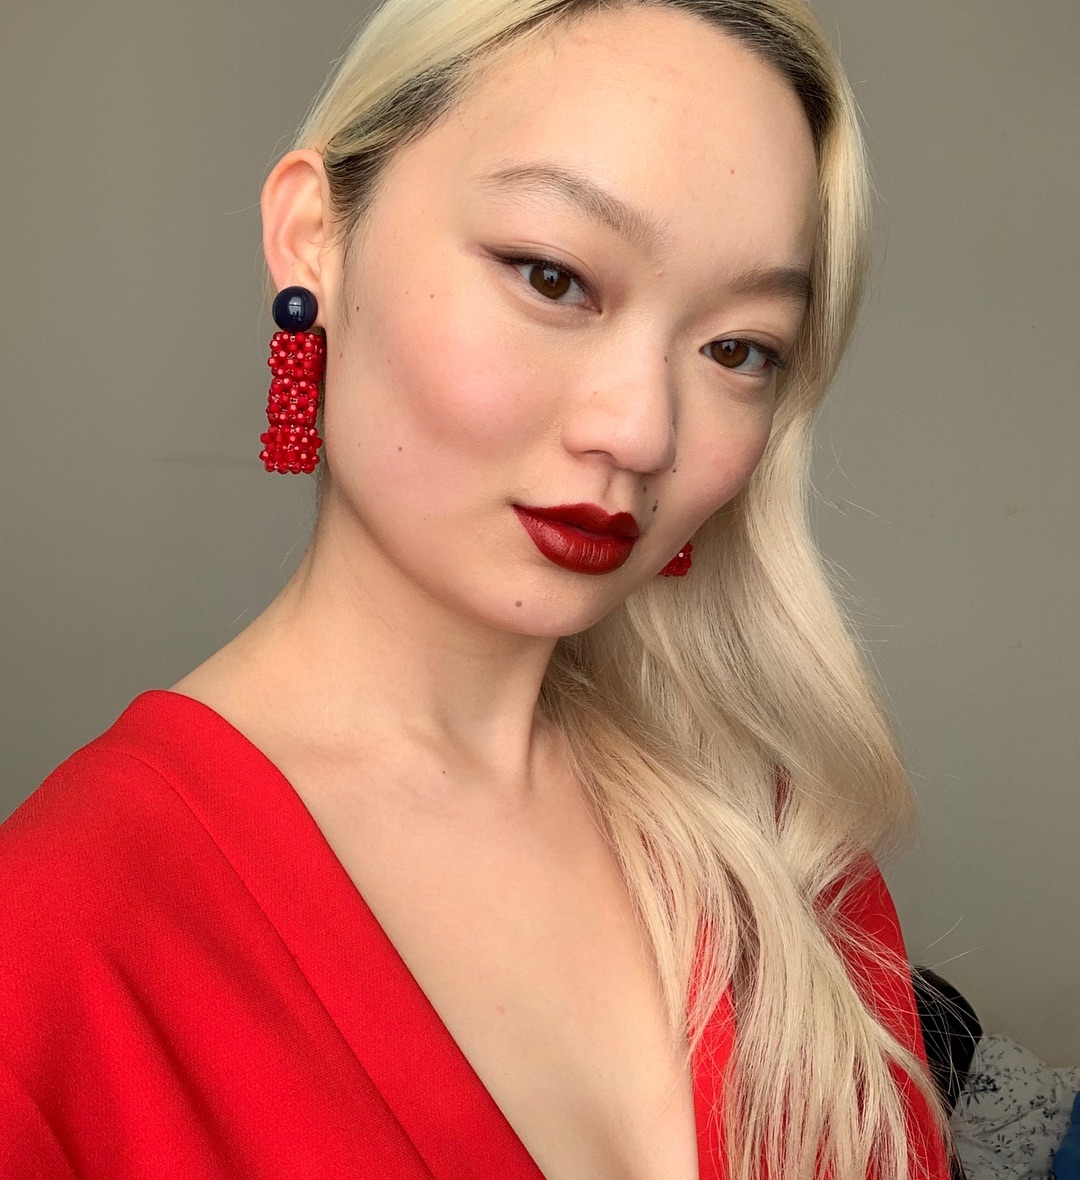 Matching Earrings and Makeup: Jessica wearing red lipstick and earrings